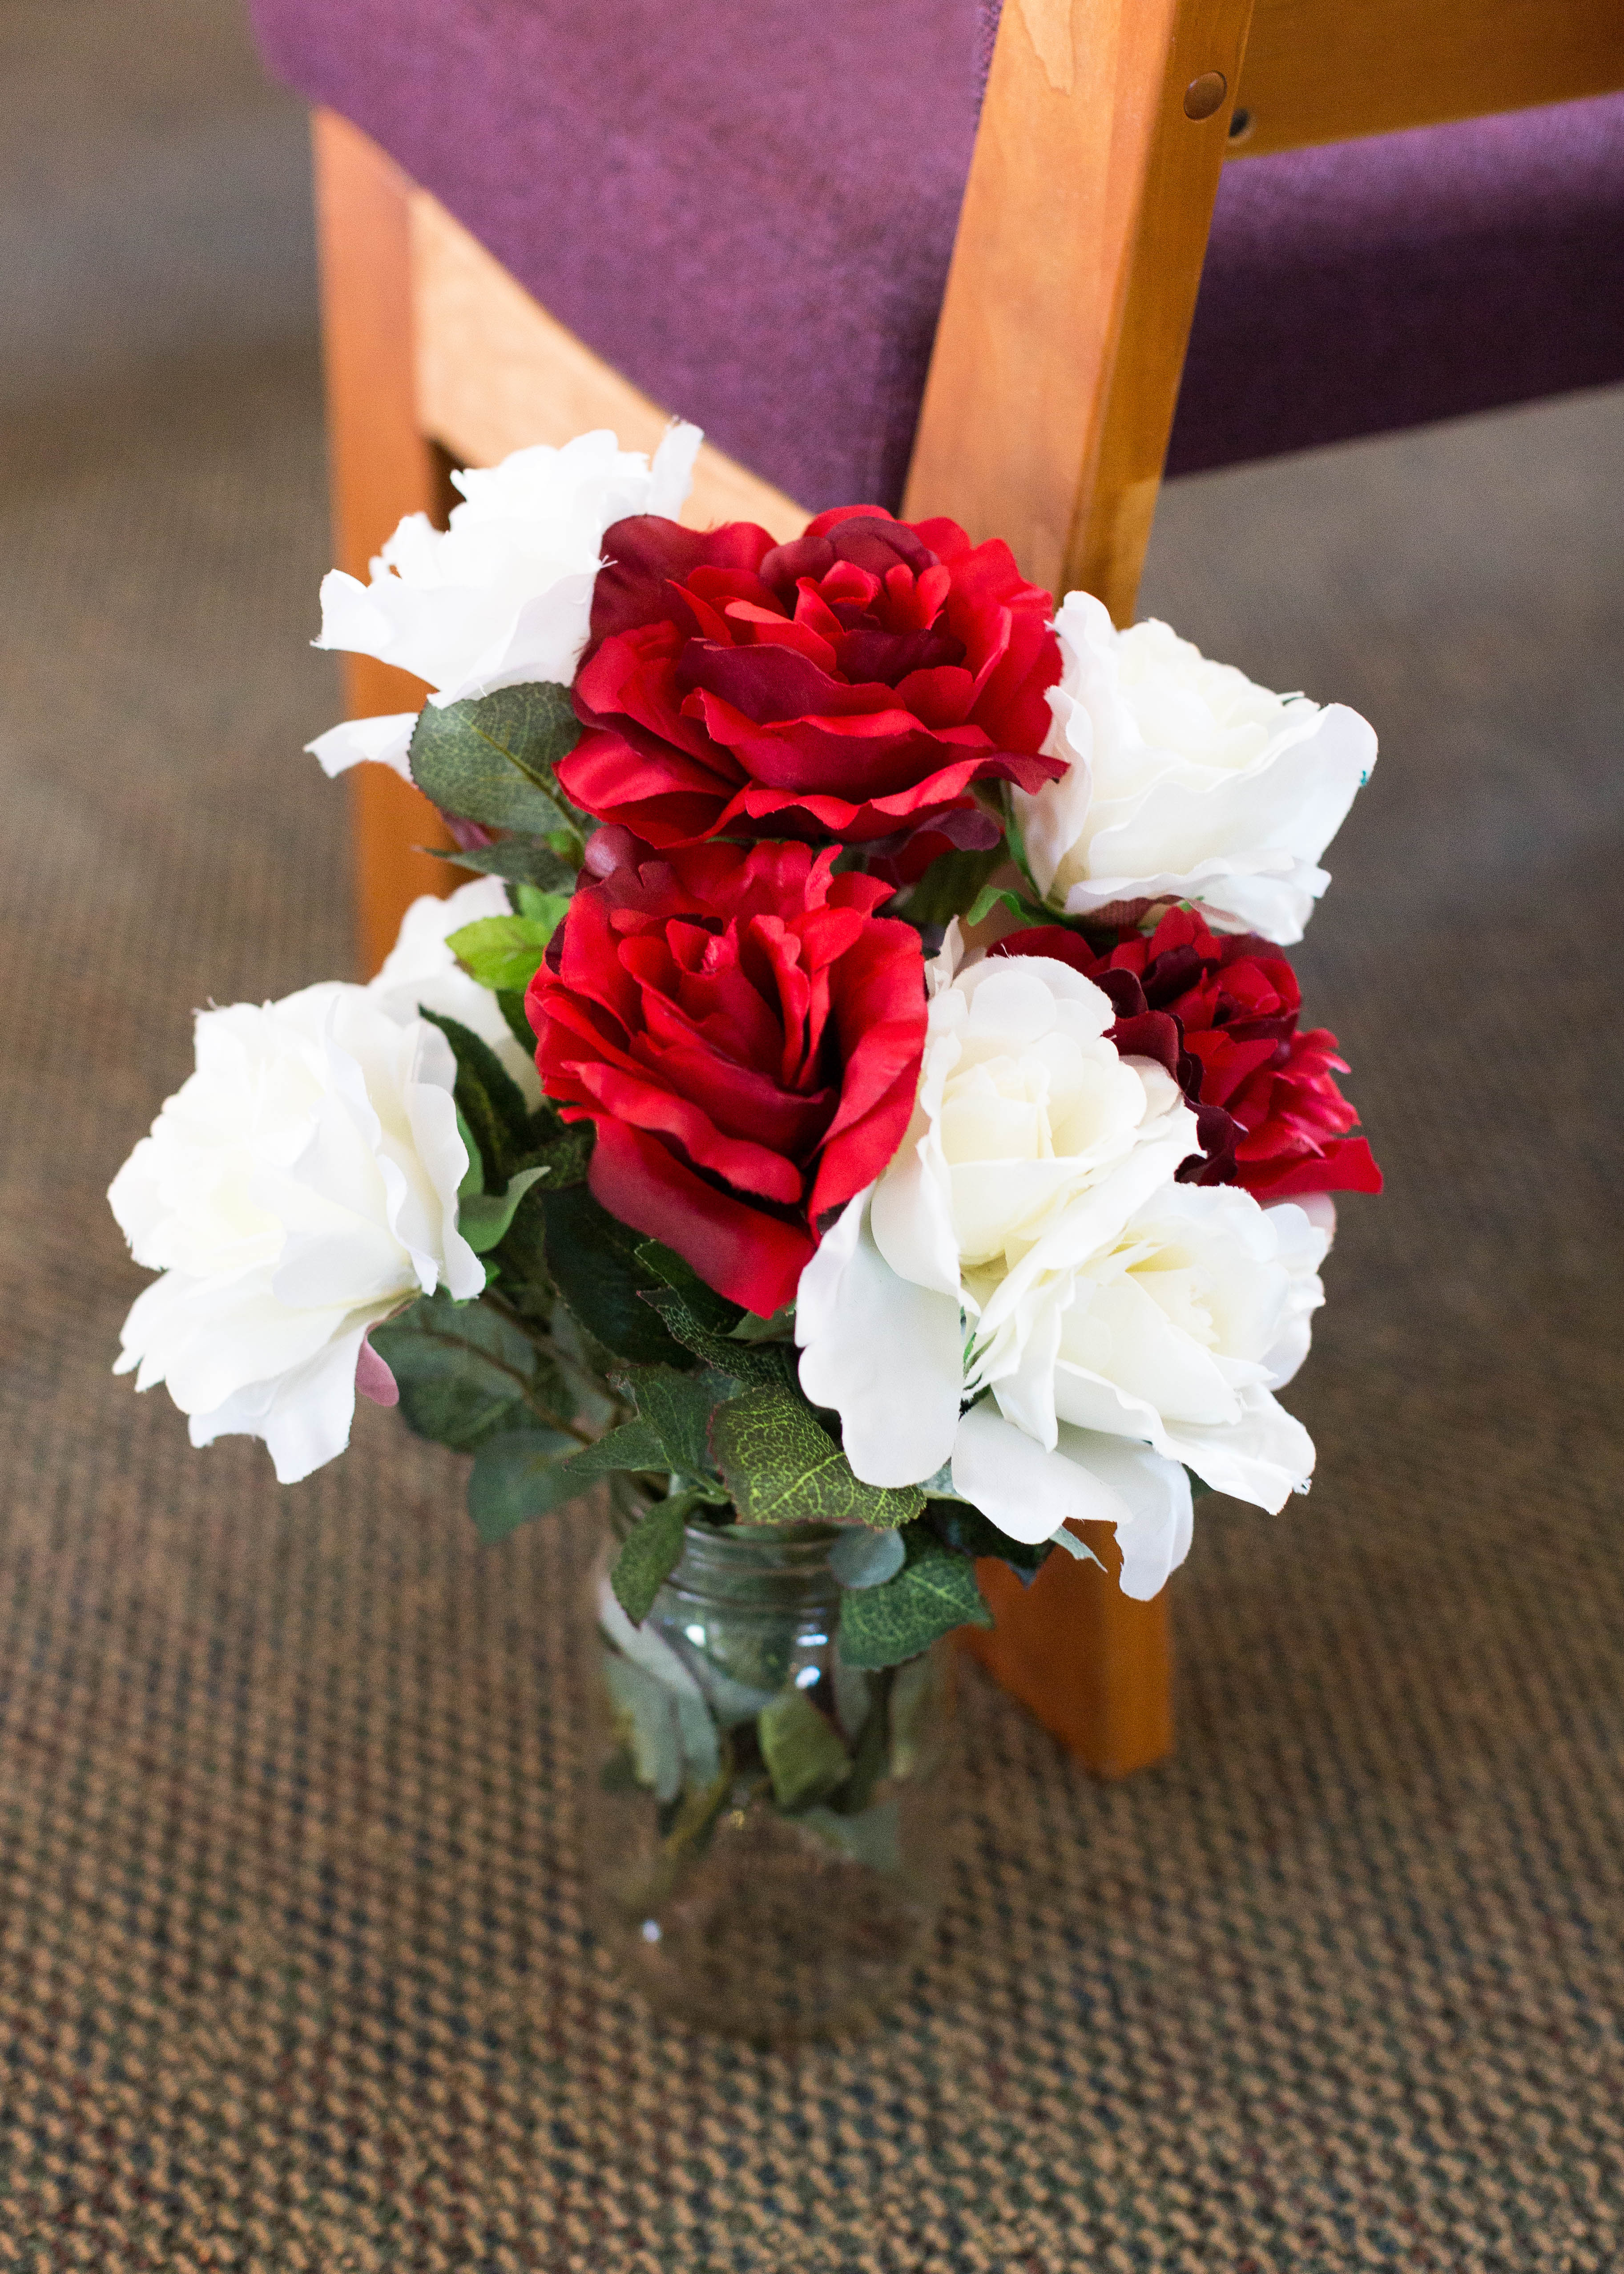 glass vase filled with white a red fabric roses